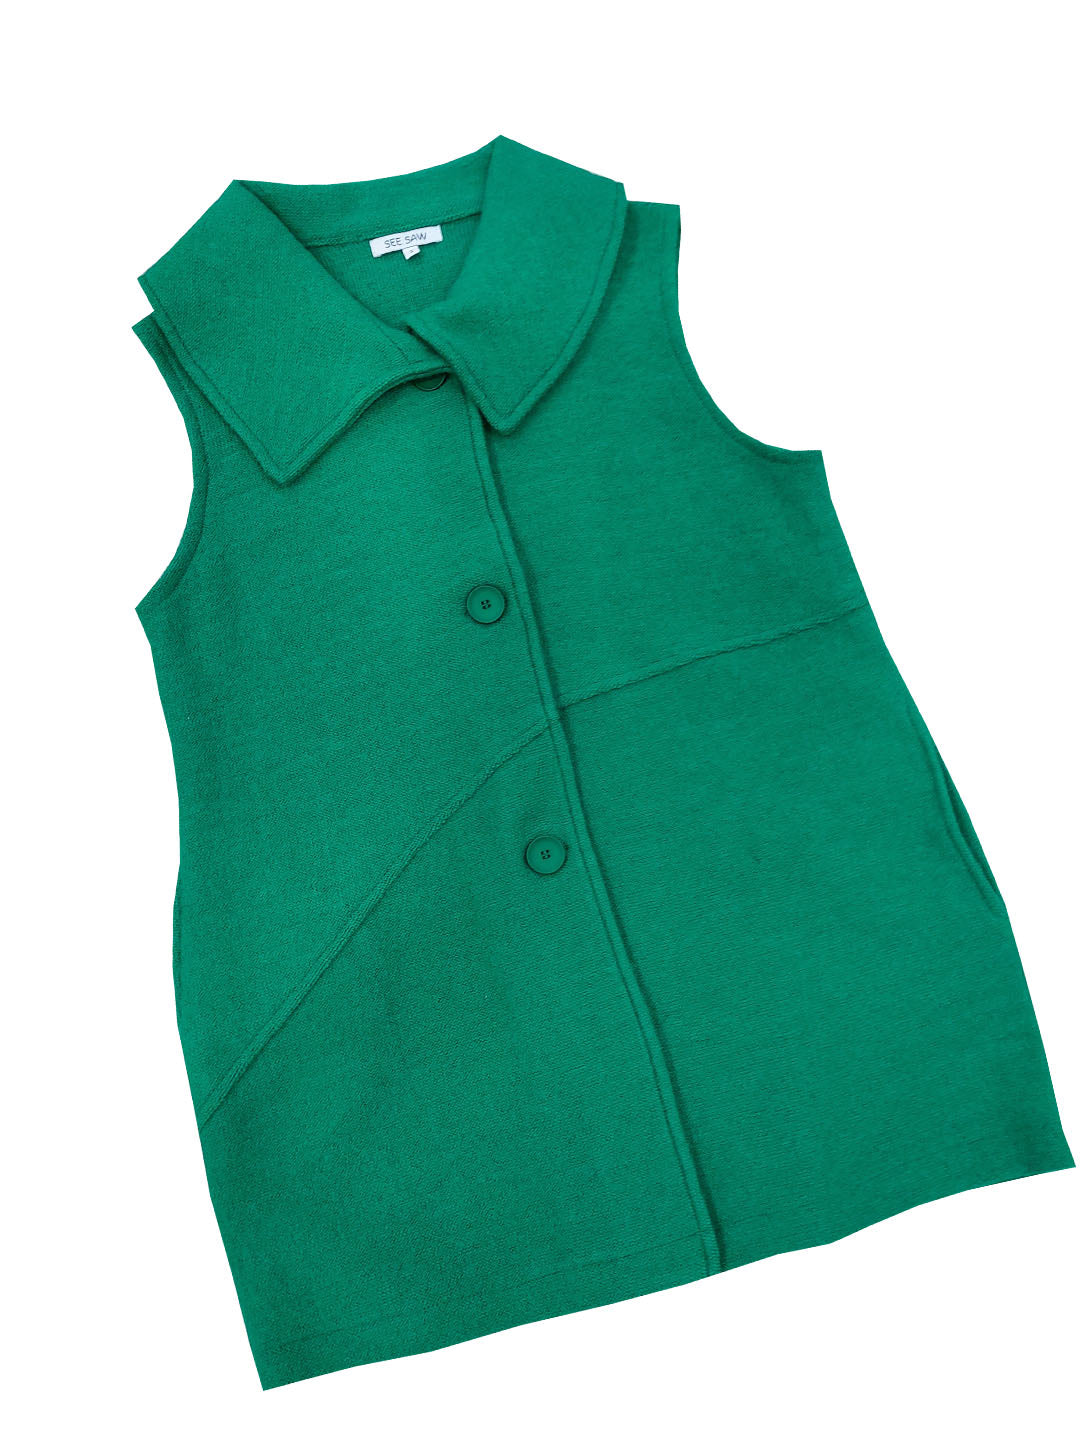 SEE SAW LONGER COLLARED BUTTON VEST